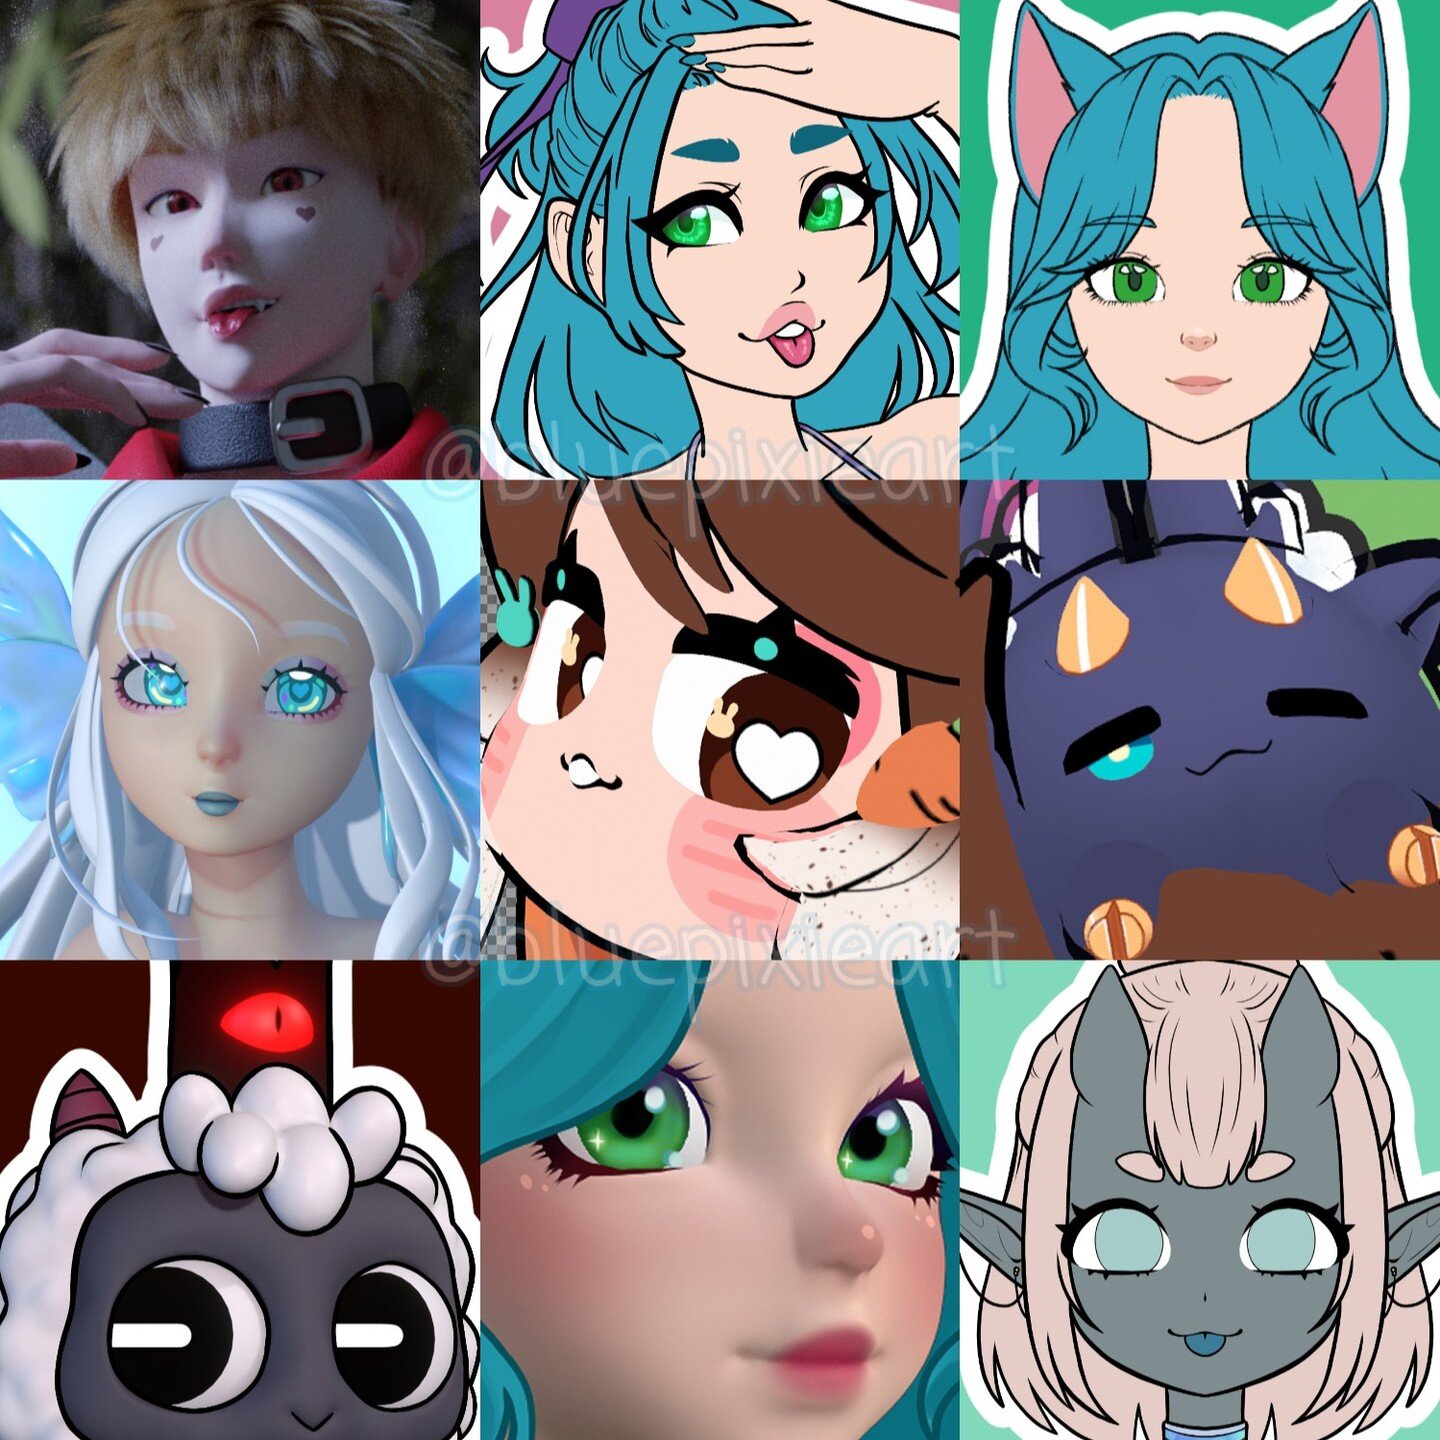 made this thing for the #faceyourart trend on twitter thats been doing the rounds and thought to share it here

perks of being a 2d and 3d artist means you can share a lot of variation

featuring @bunchatas and @starpyrate since i have yet to share t